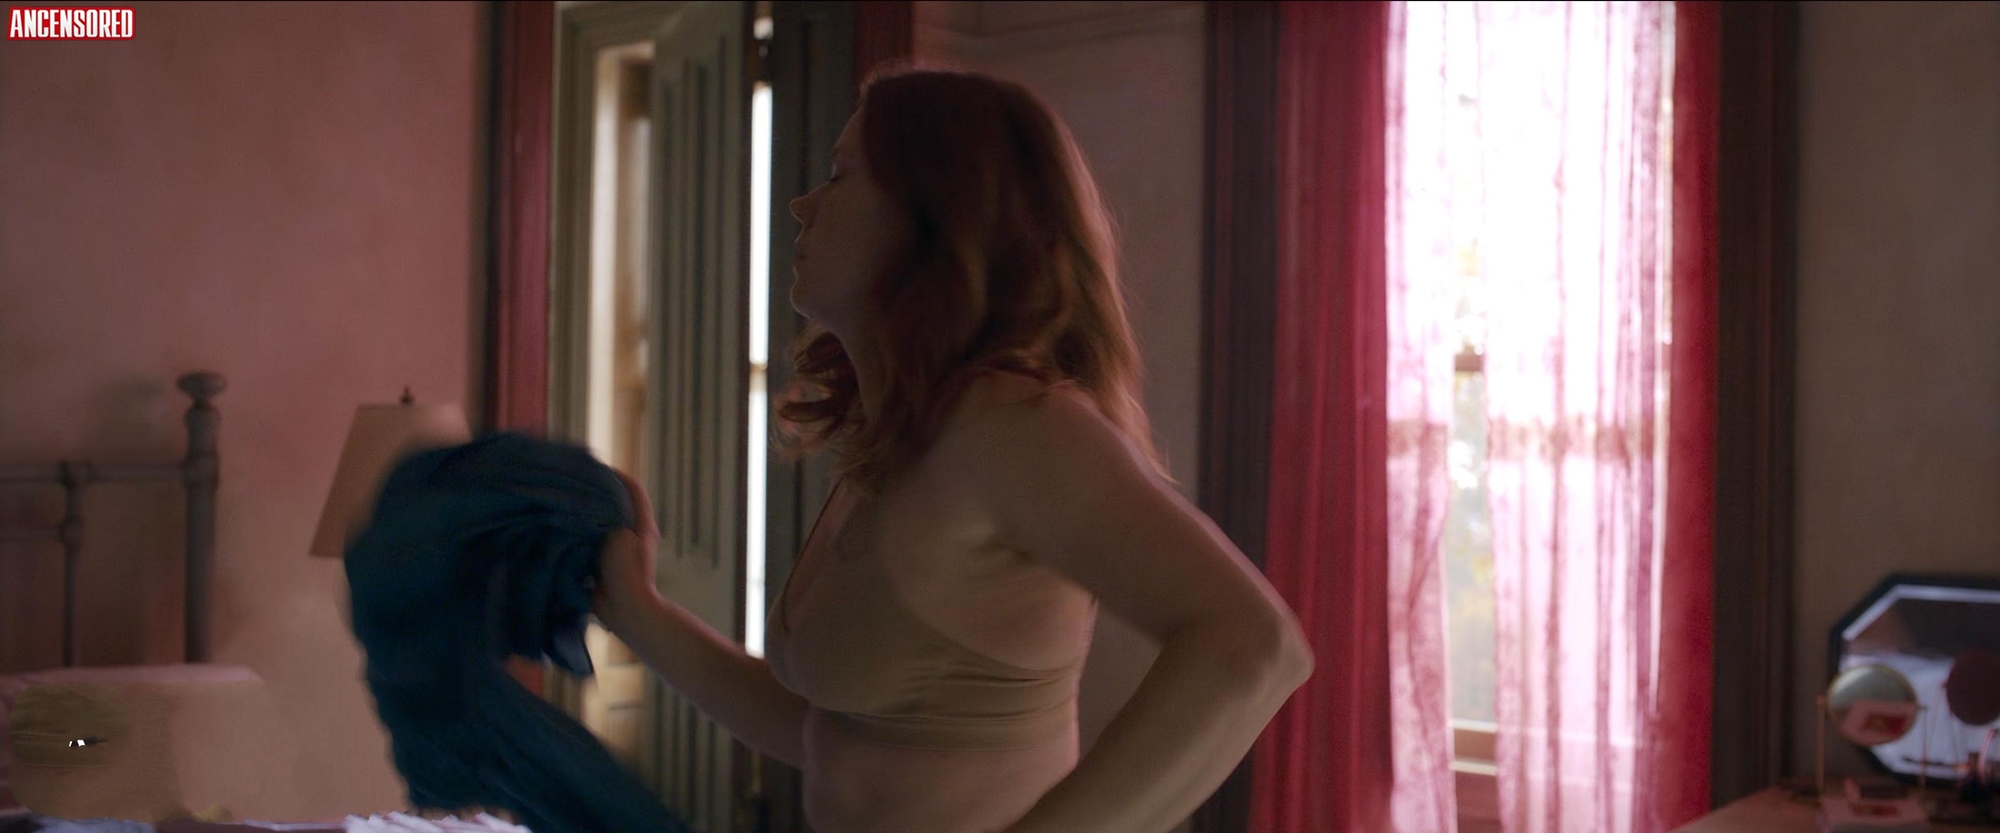 Naked Amy Adams in The Woman in the Windowu003c ANCENSORED pic